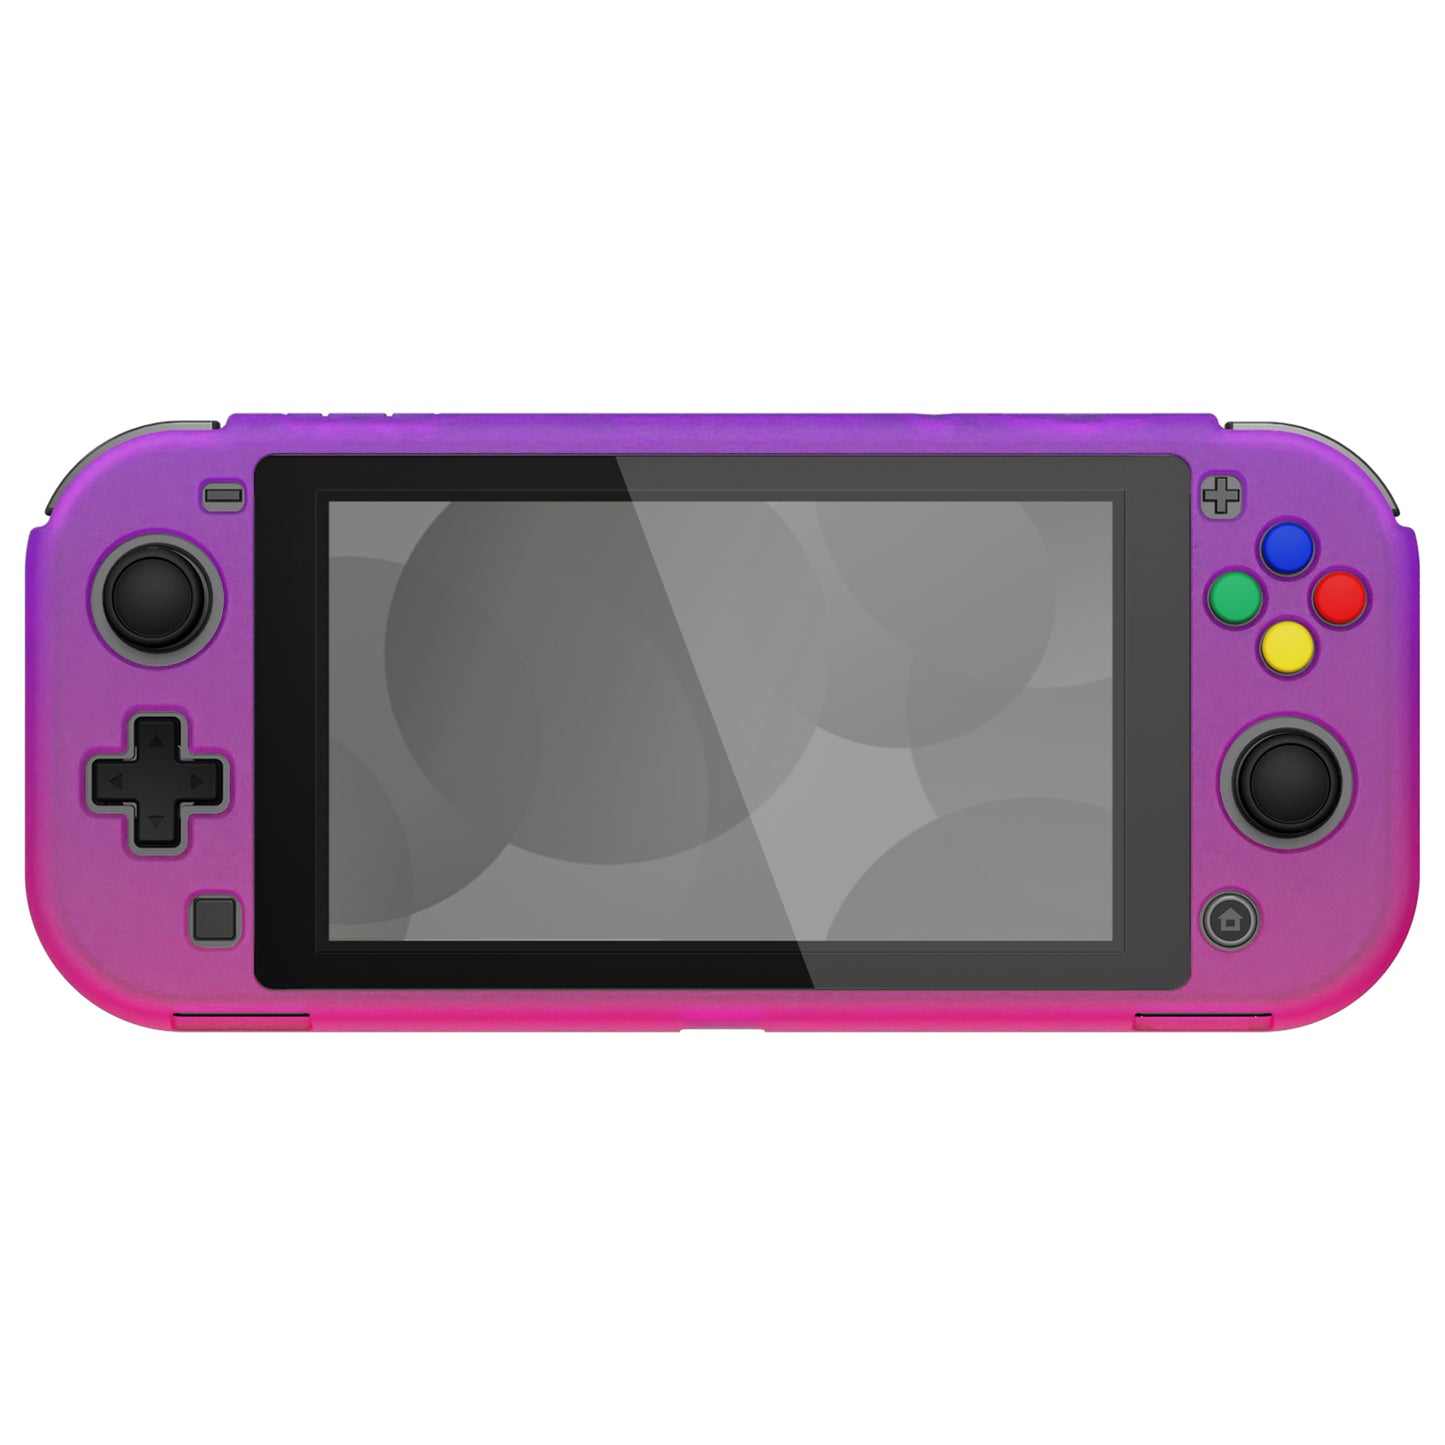 PlayVital Clear Atomic Purple Rose Red Protective Case for NS Switch Lite, Hard Cover Protector for NS Switch Lite - 1 x Black Border Tempered Glass Screen Protector Included - YYNLP007 PlayVital